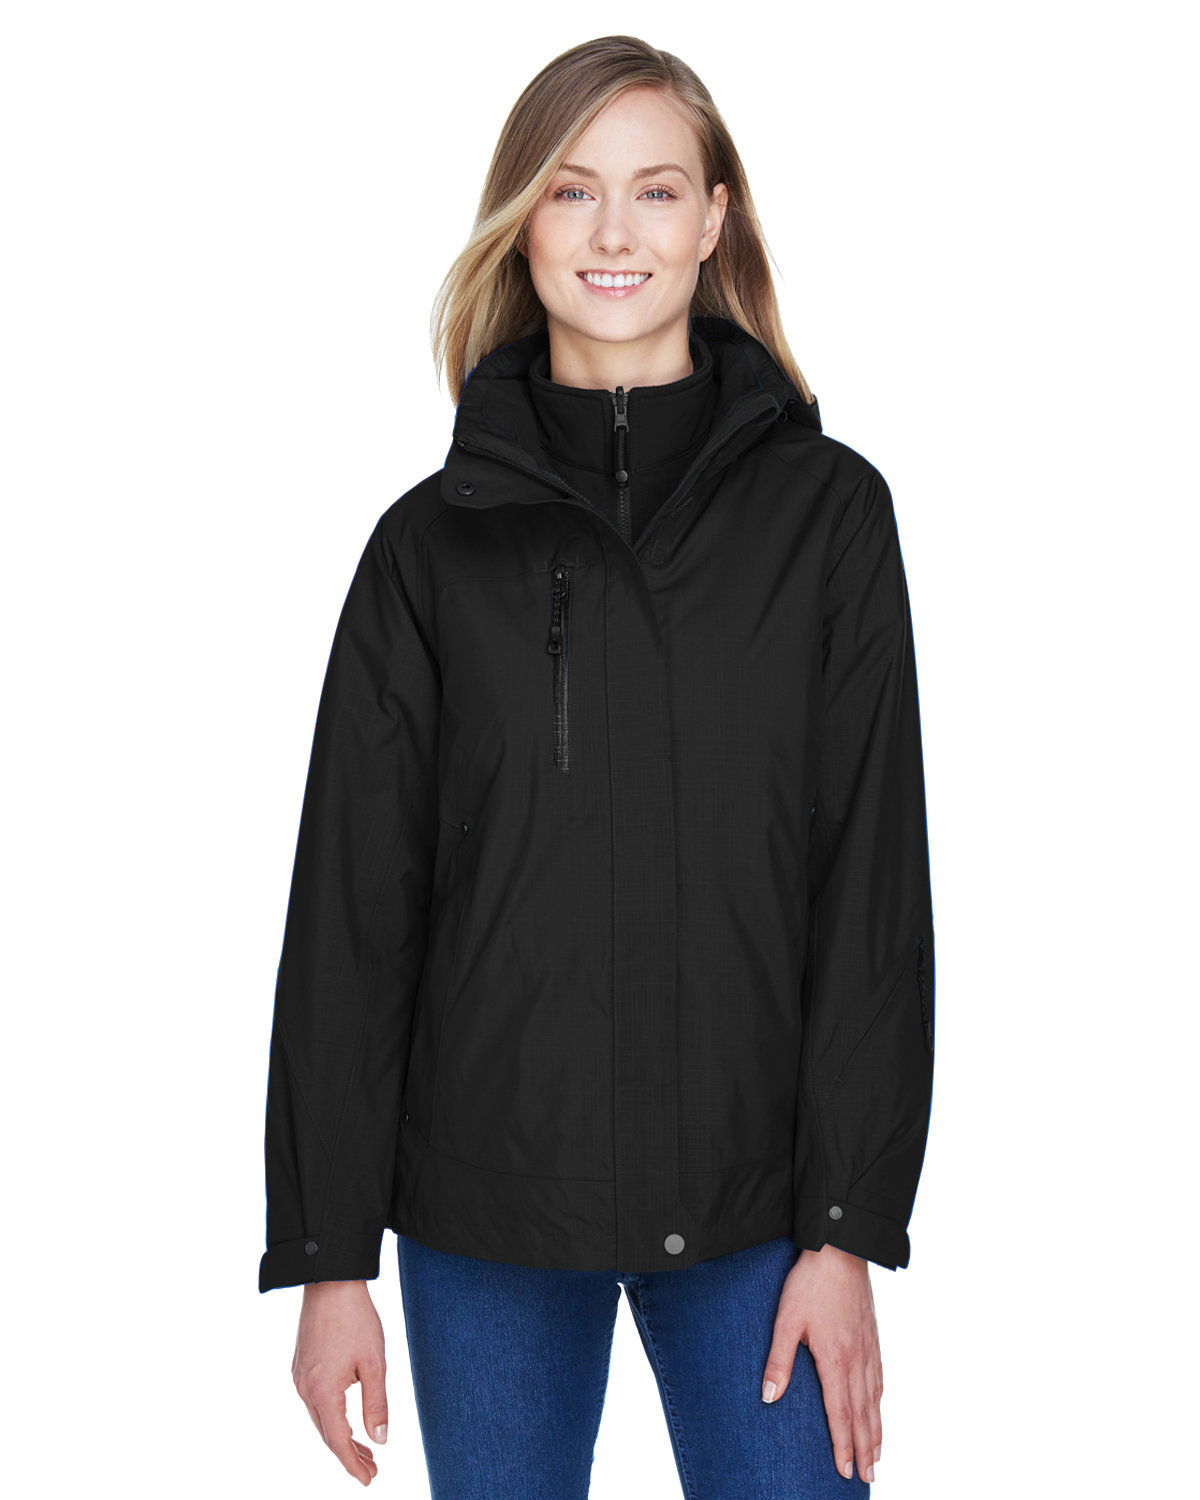 Buy Ladies Caprice 3-In-1 Jacket With Soft Shell Liner - North End